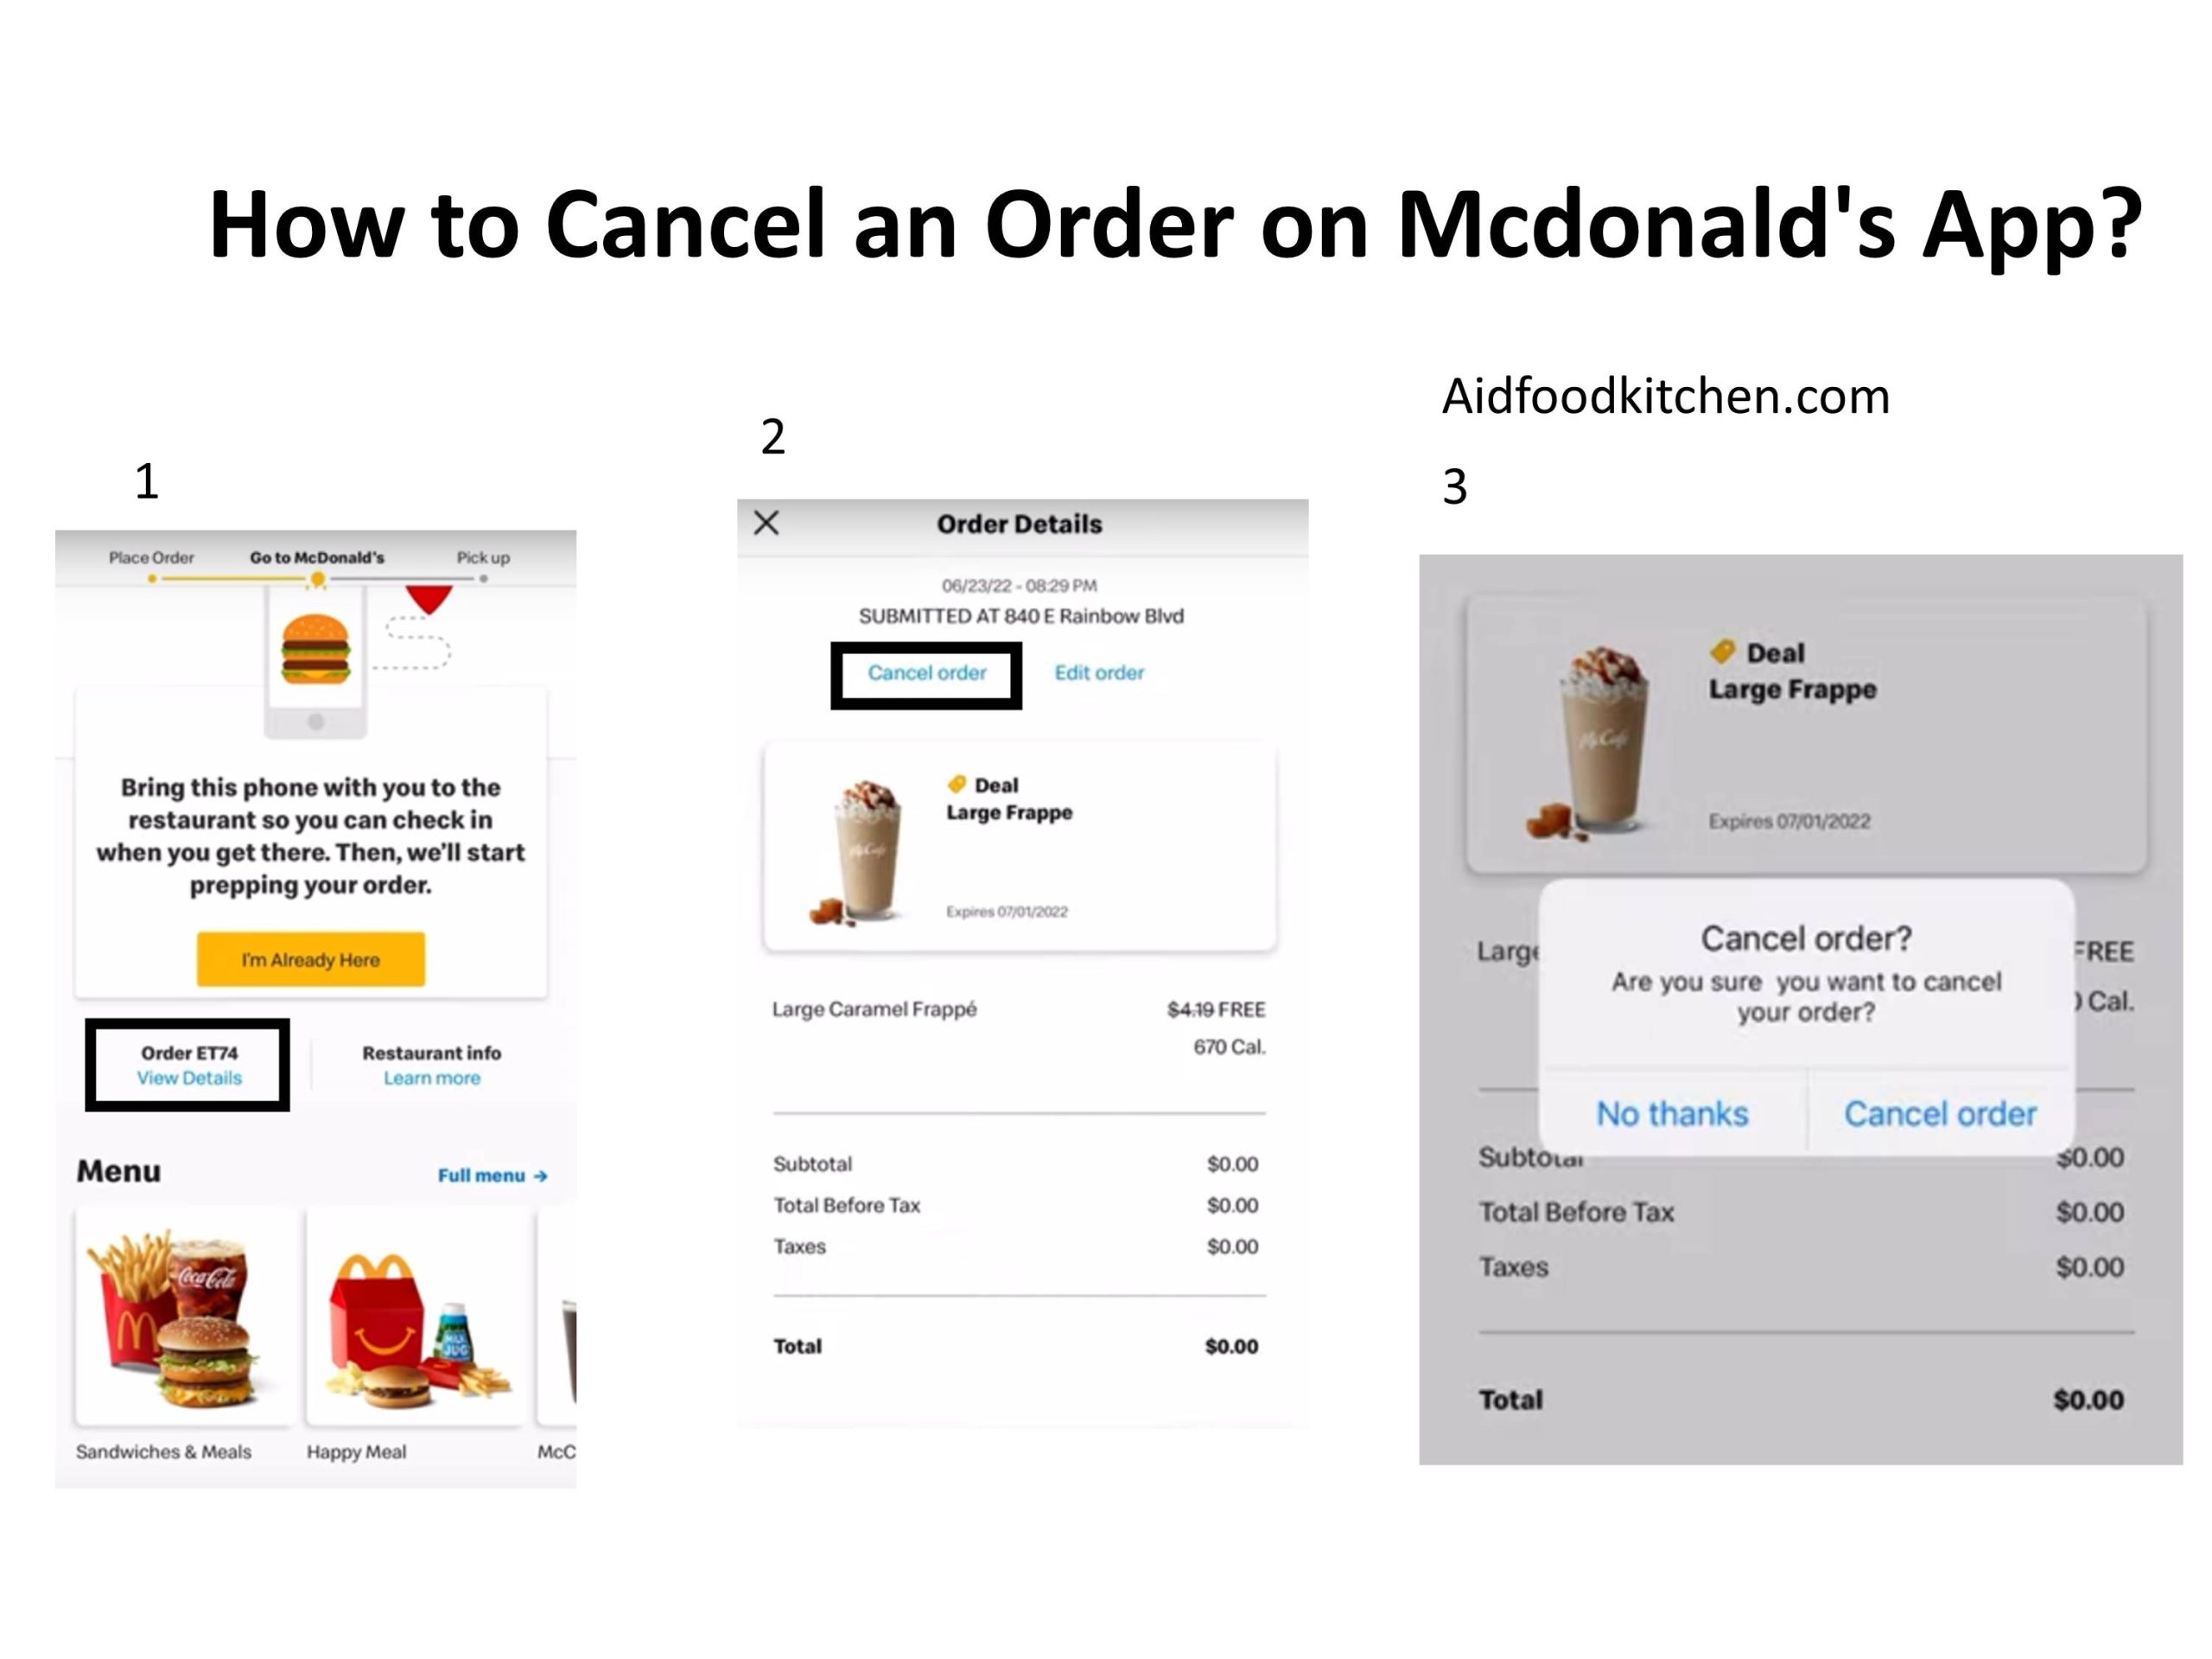 How to Cancel an Order on Mcdonald's App?